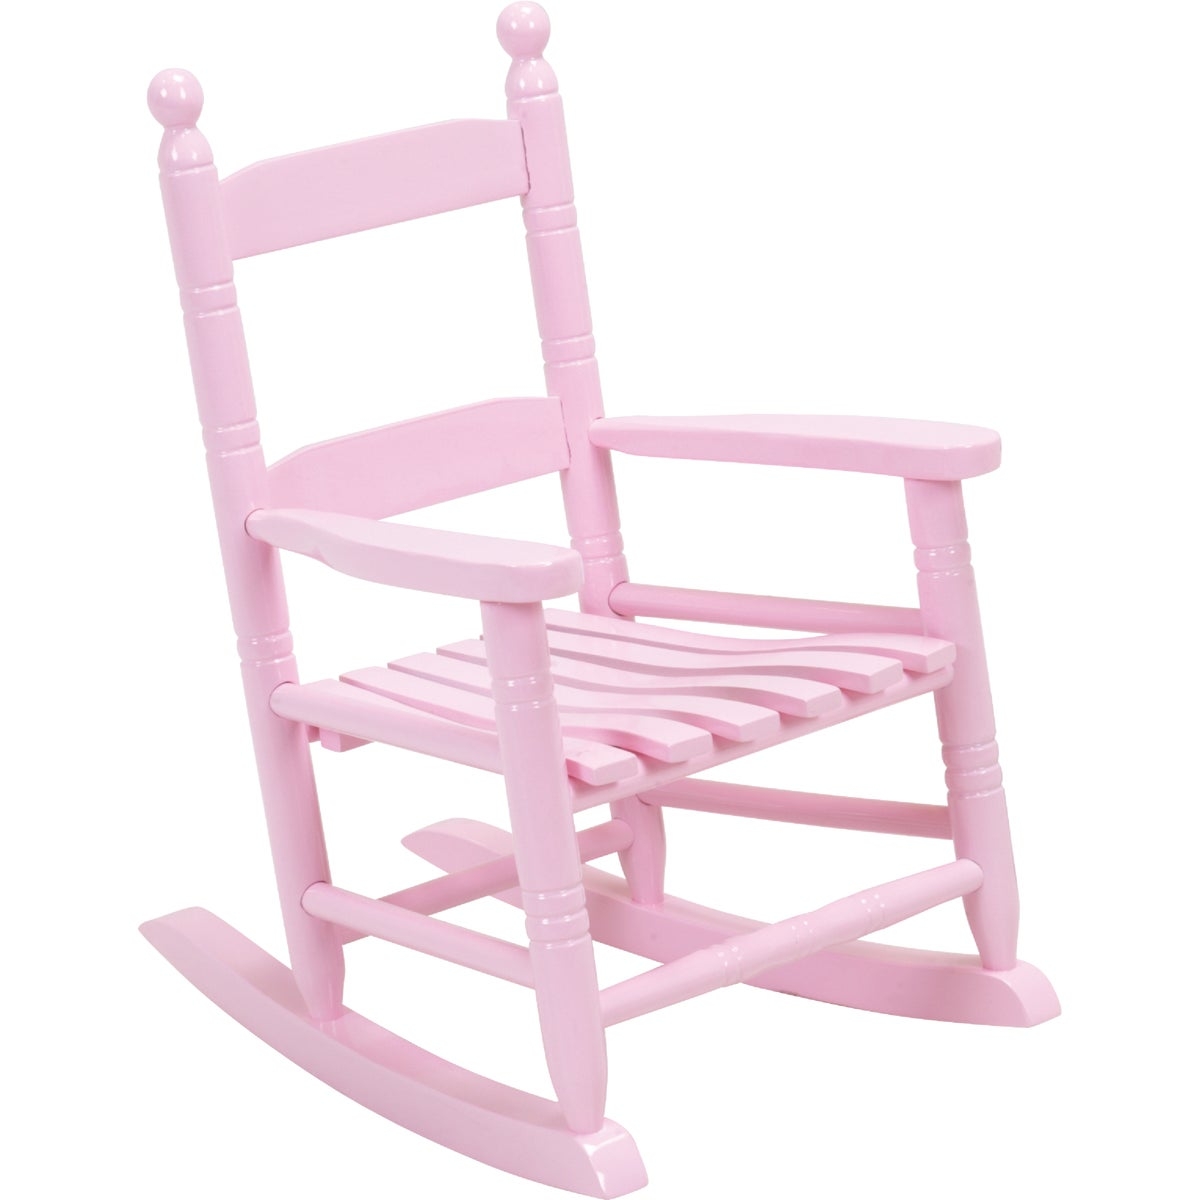 Knollwood Children's Rocking Chair Finish: Pink